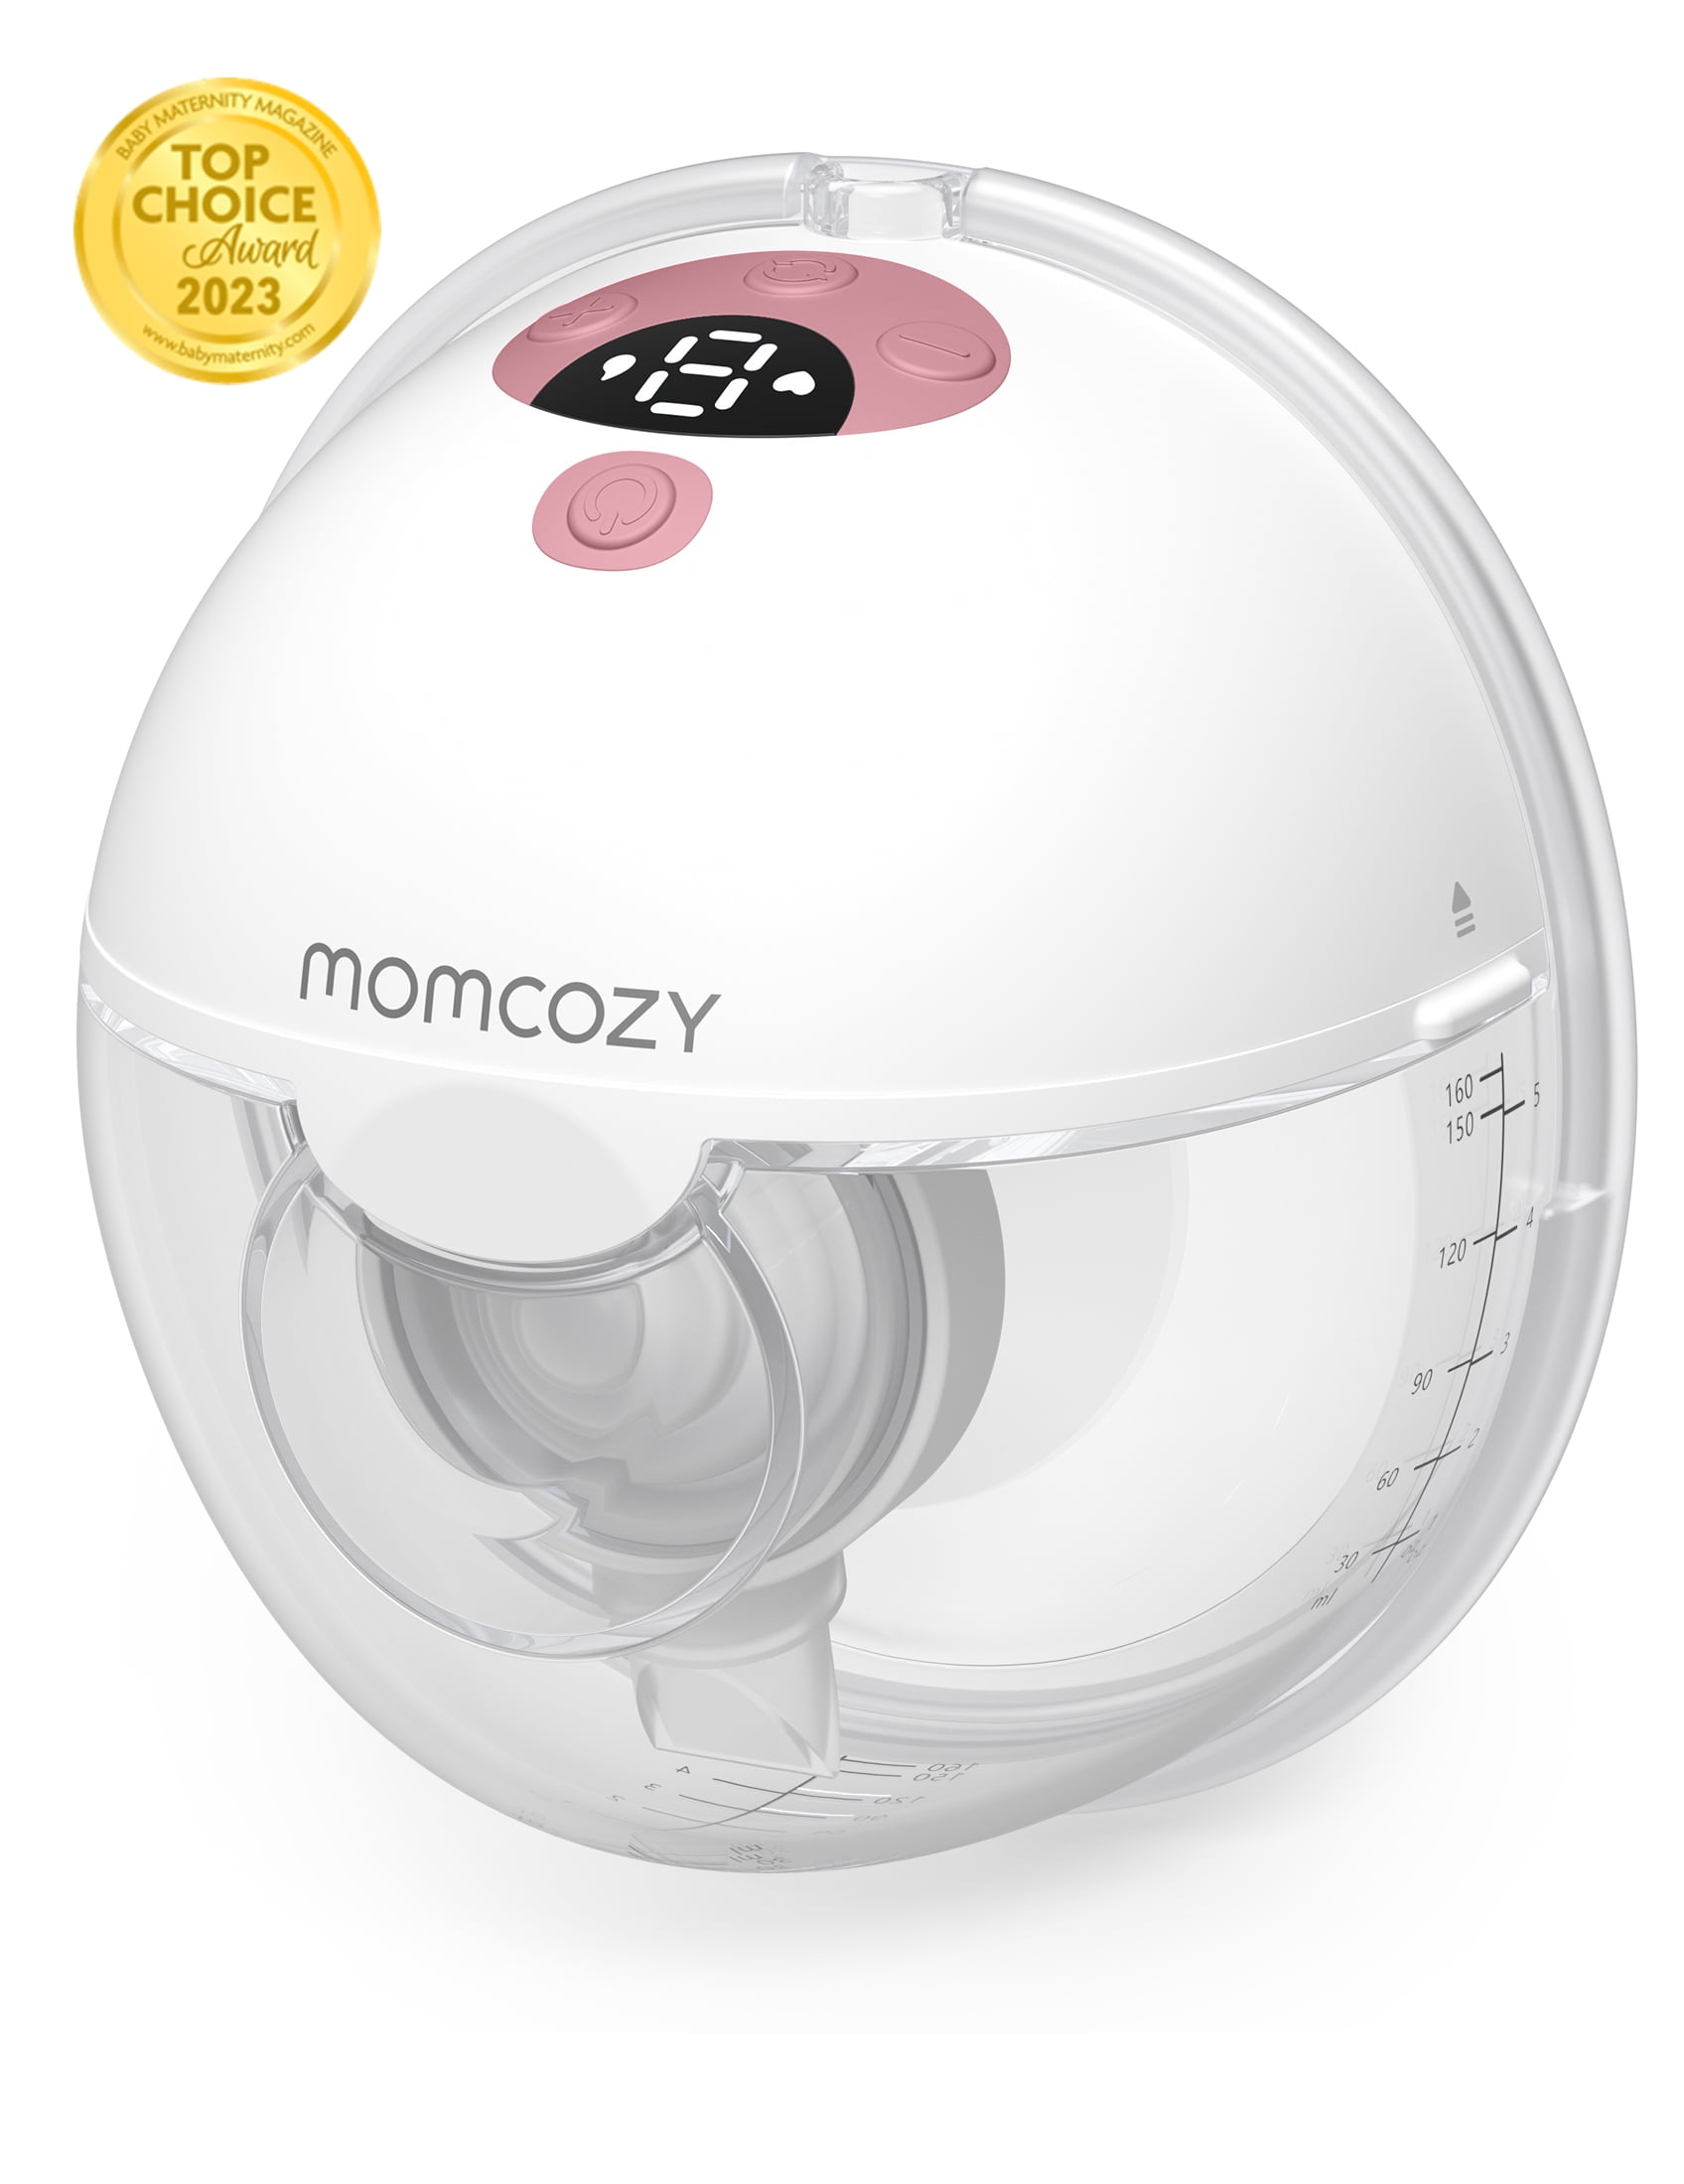  Momcozy Milk Collector Only Compatible with Momcozy M5 NOT for  Others. Original M5 Breast Pump Replacement Accessories, 1 Pack : Baby